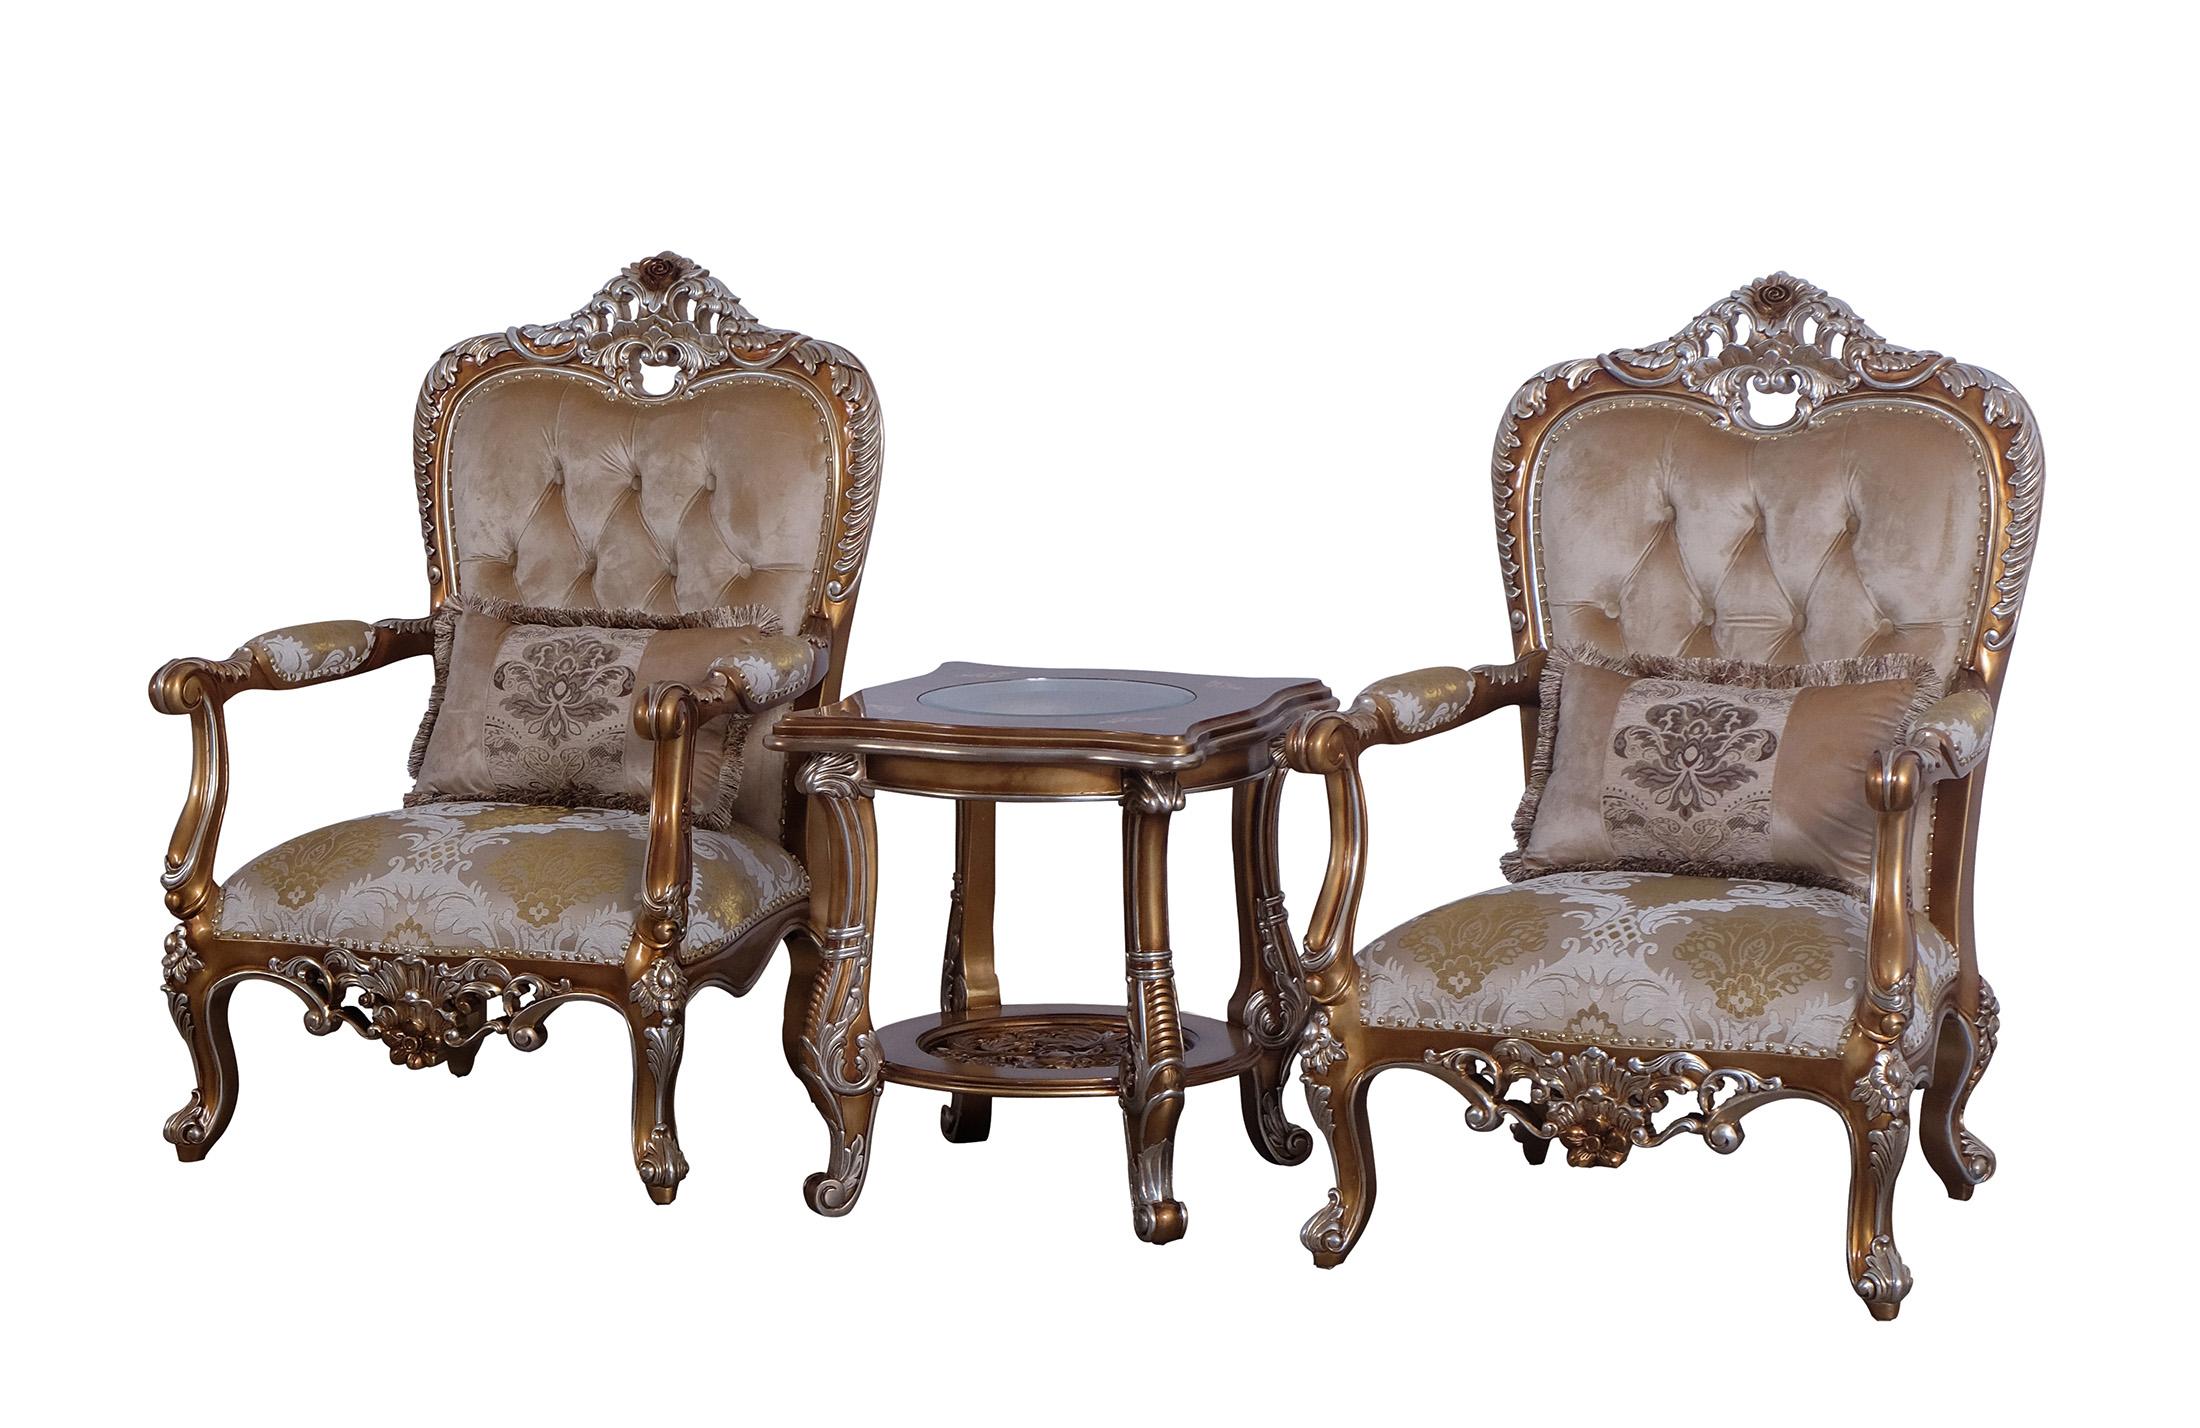 Classic, Traditional Arm Chair Set SAINT GERMAIN 35550-C-Set-2 in Sand, Gold Fabric